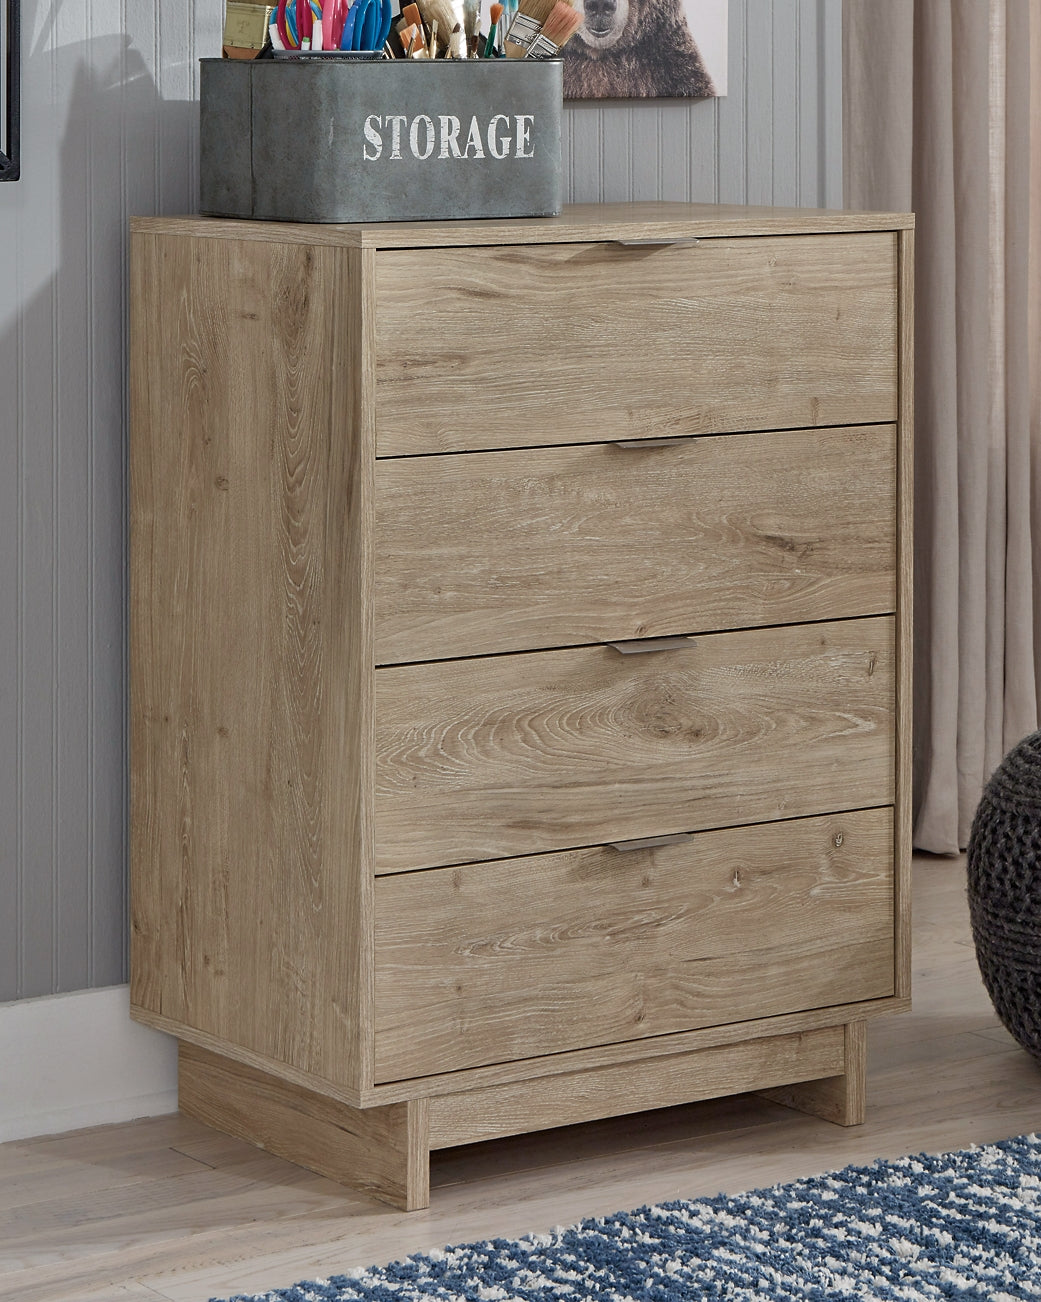 Oliah Four Drawer Chest